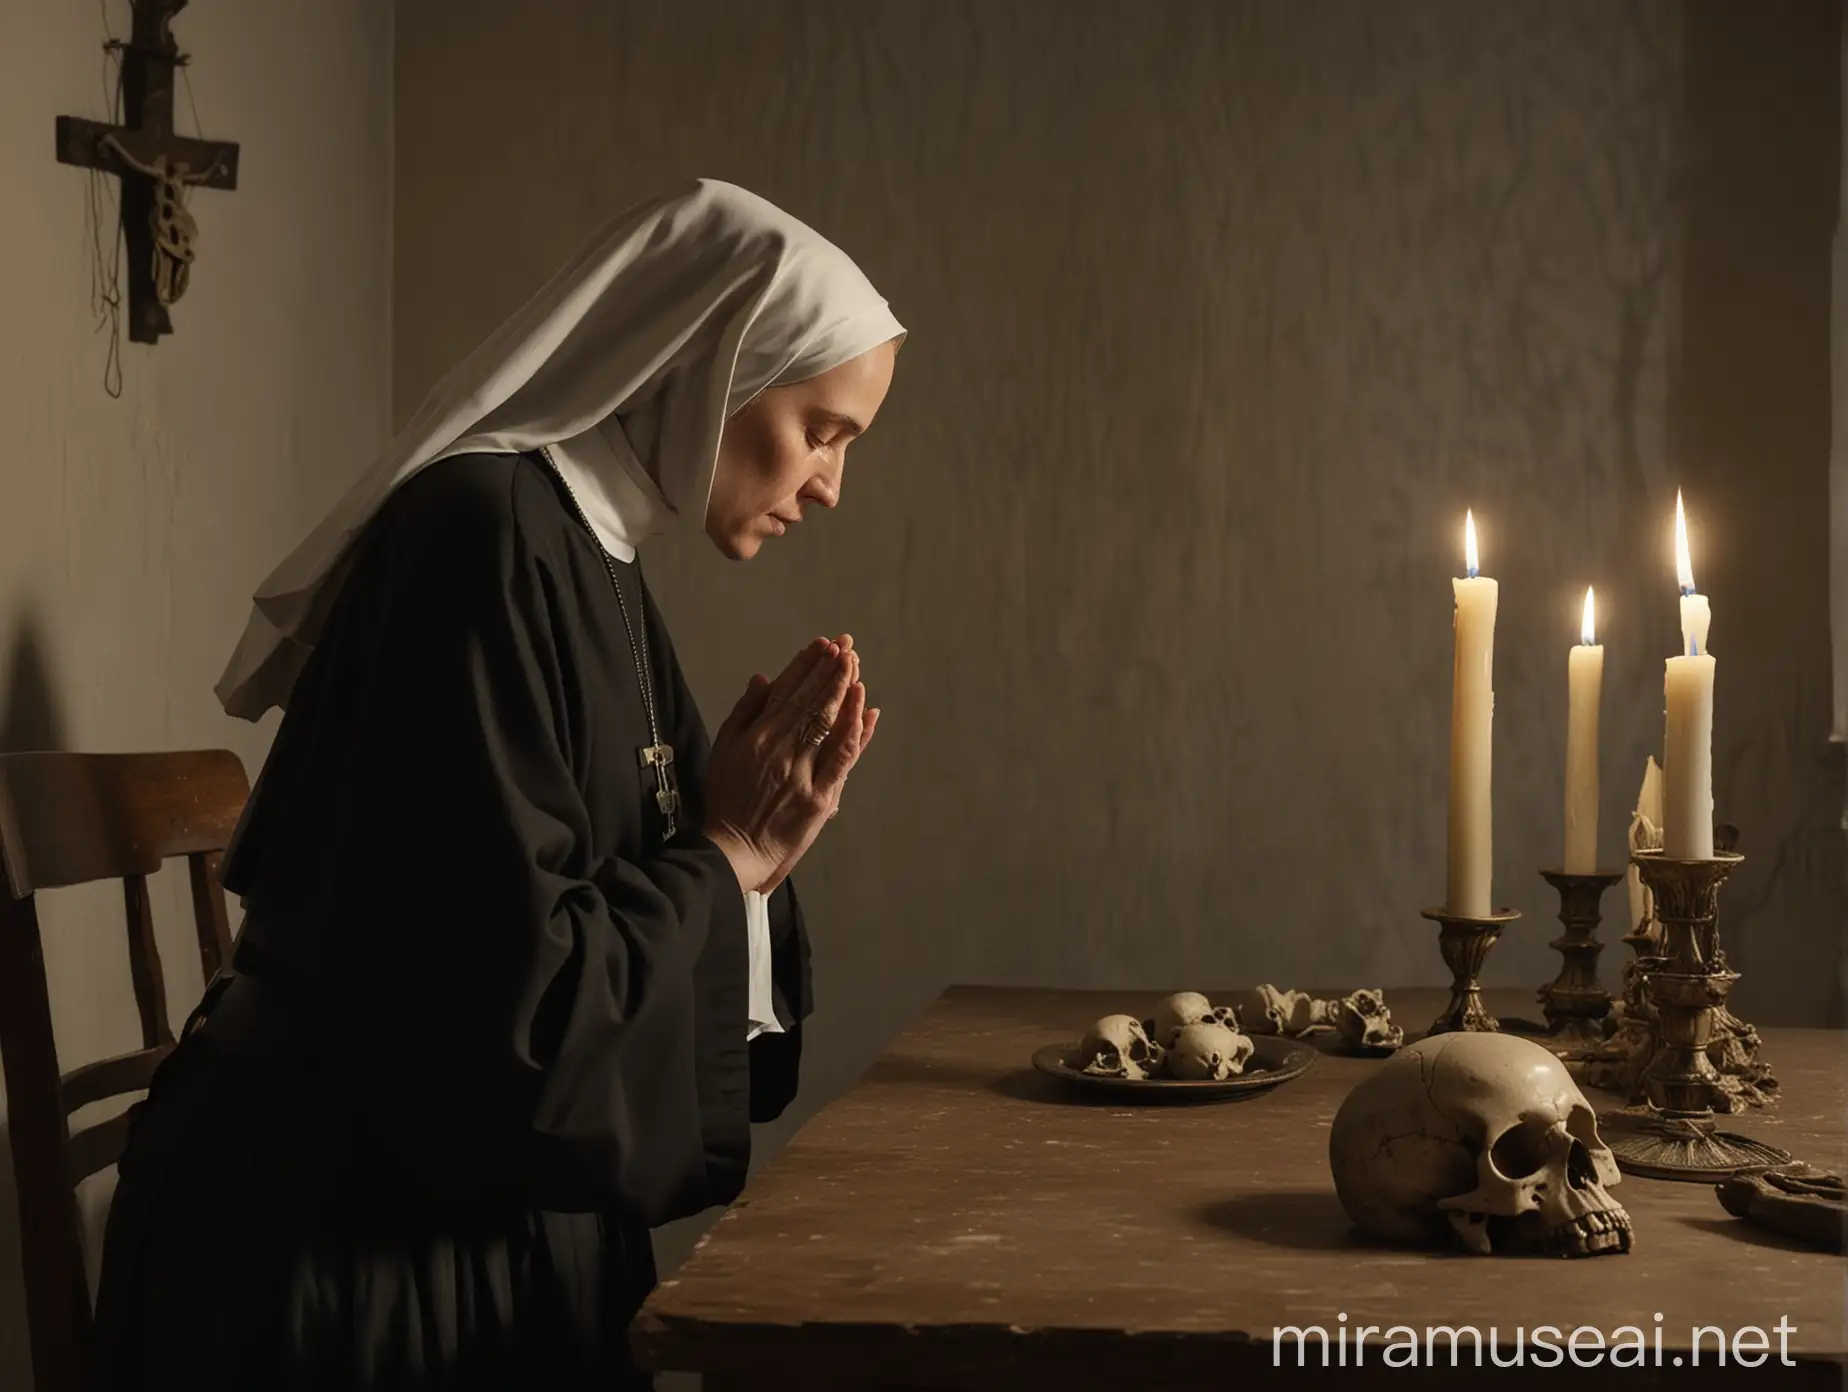 Nun Praying with Skull and Candle in Room